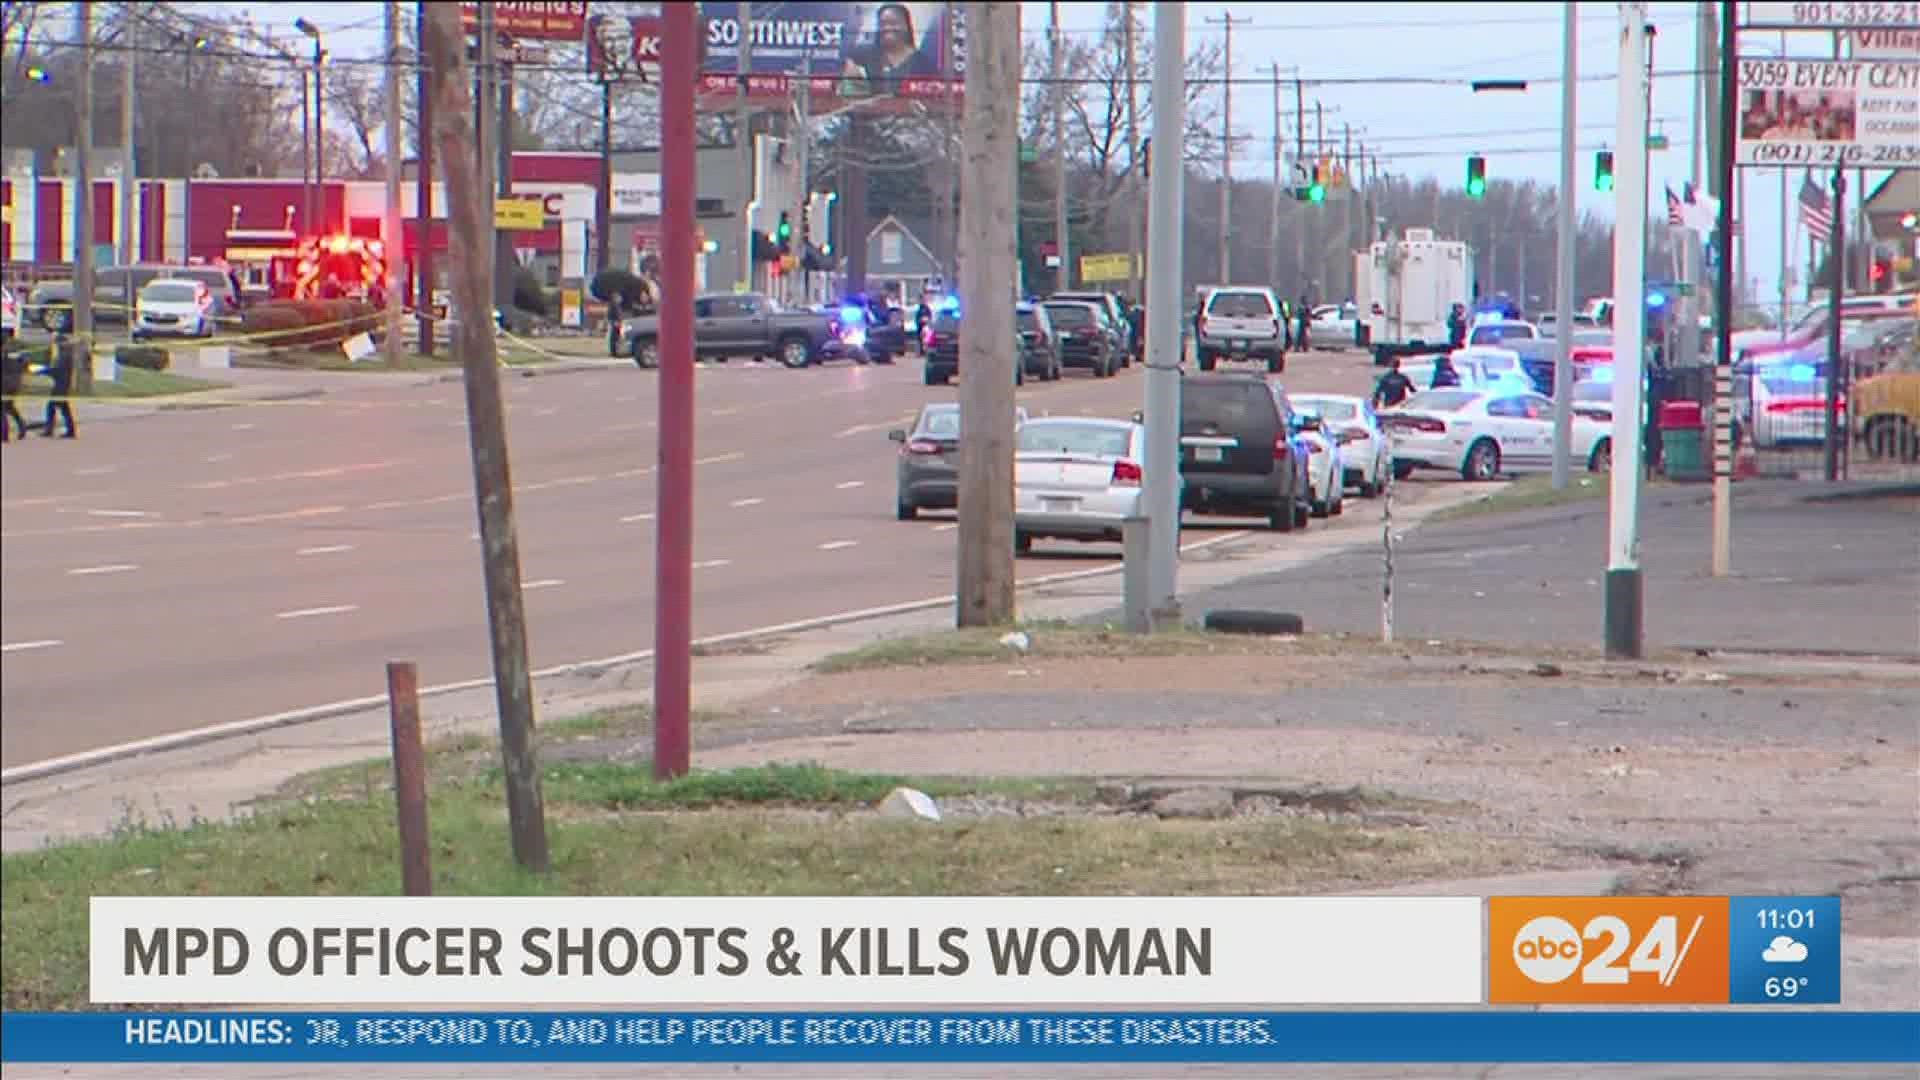 The Tennessee Bureau of Investigation was called in to investigate as Memphis Police said a woman was shot and killed by an officer.